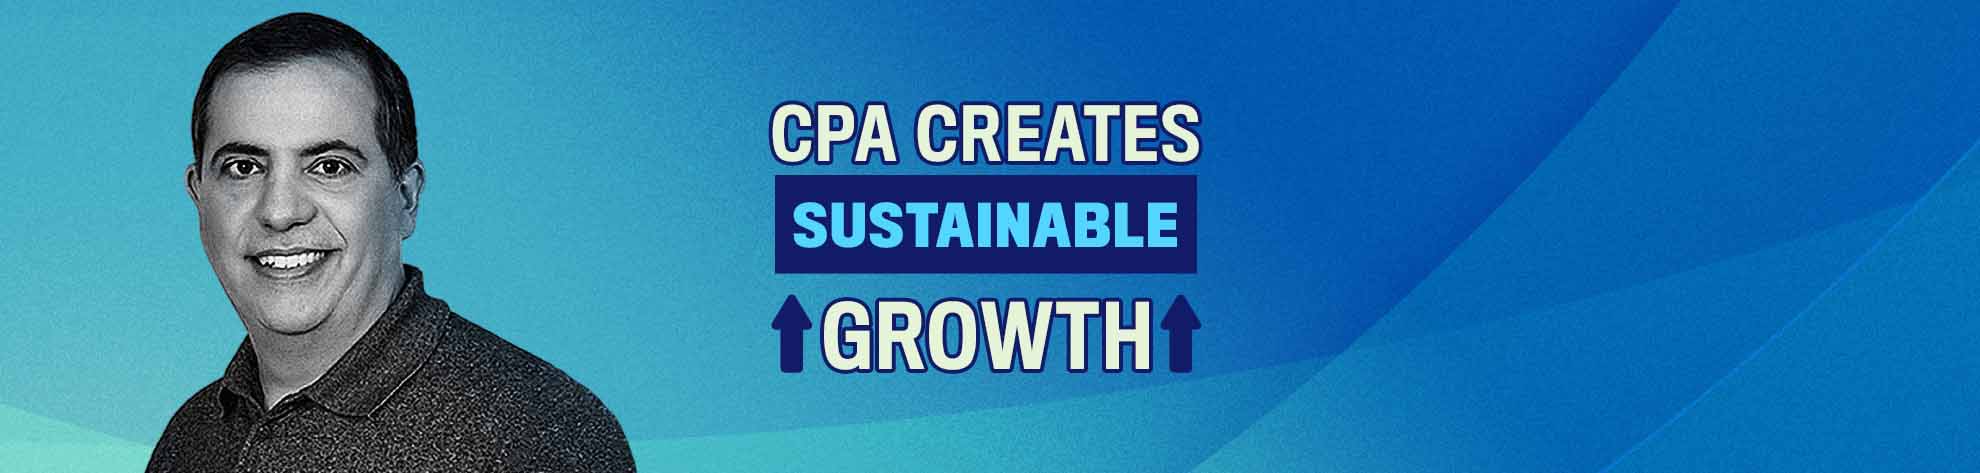 cpa creates sustainable growth